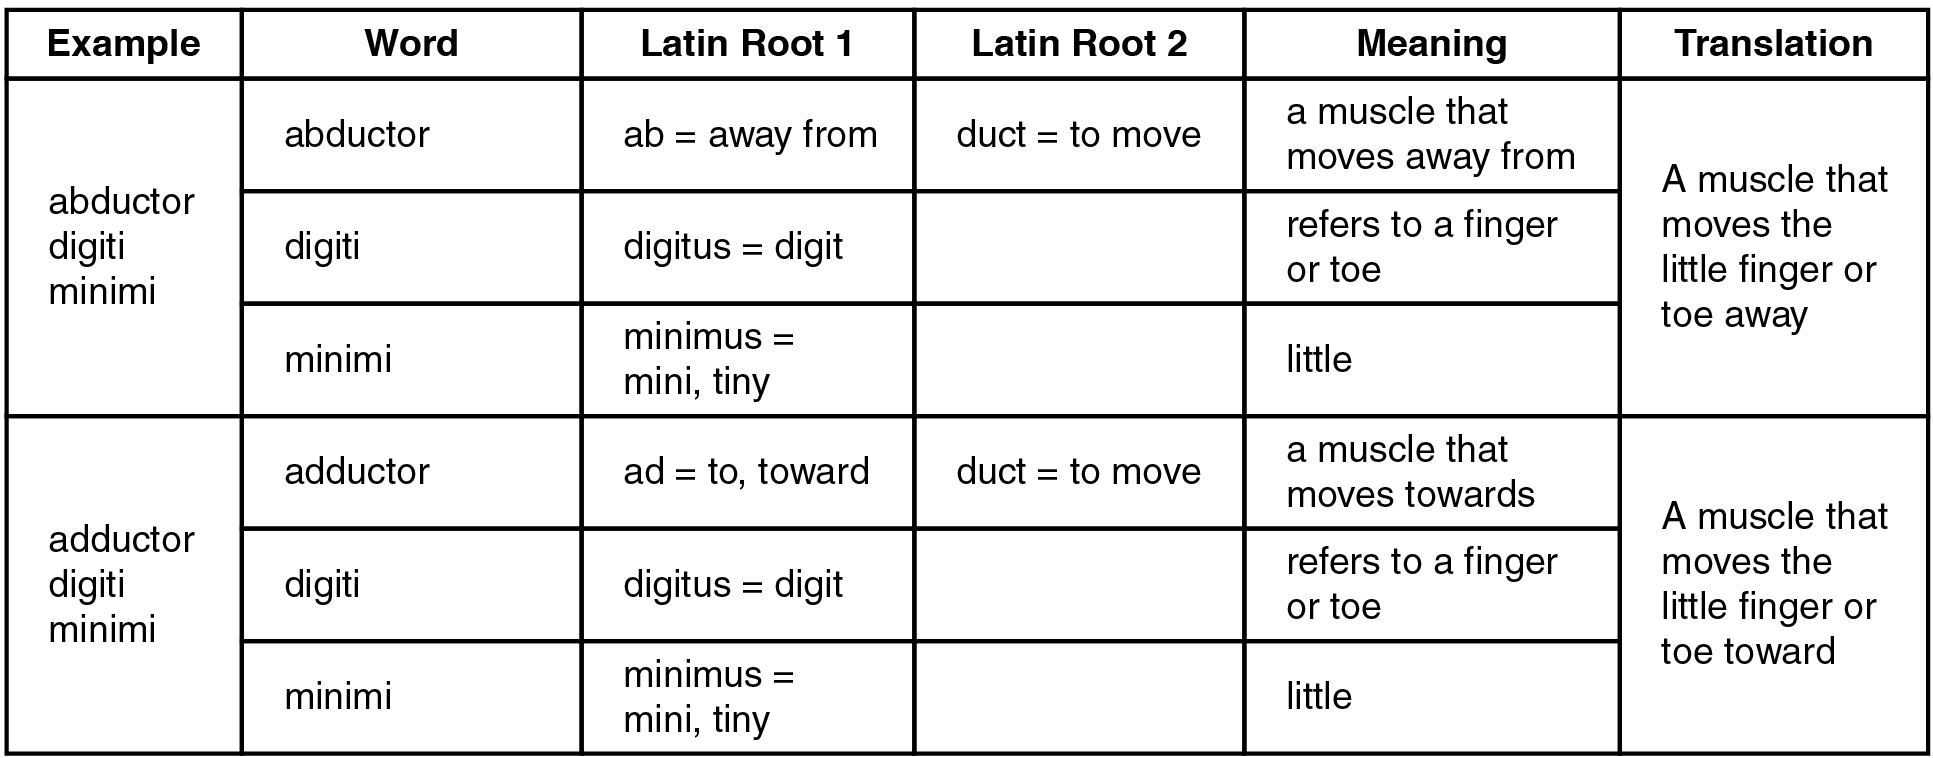 This table explains the Latin root, meaning, and translation of different muscle names.